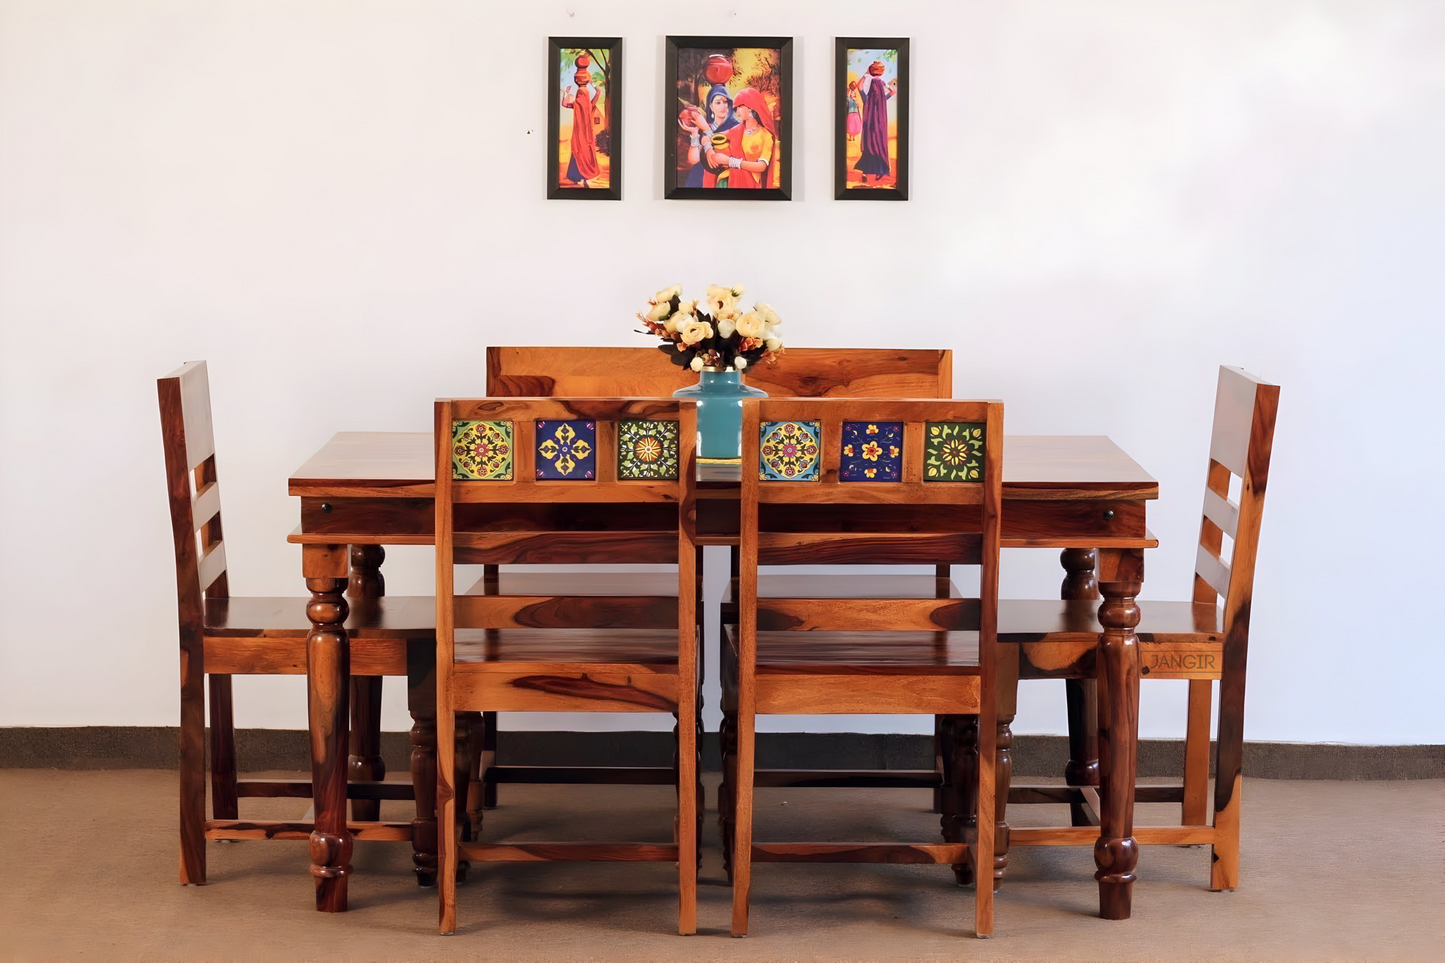 Transform your dining room with our Tiles dining table sets, made with Sheesham wood with ceramic tiles. Buy six -four seater dining table near you in Bangalore